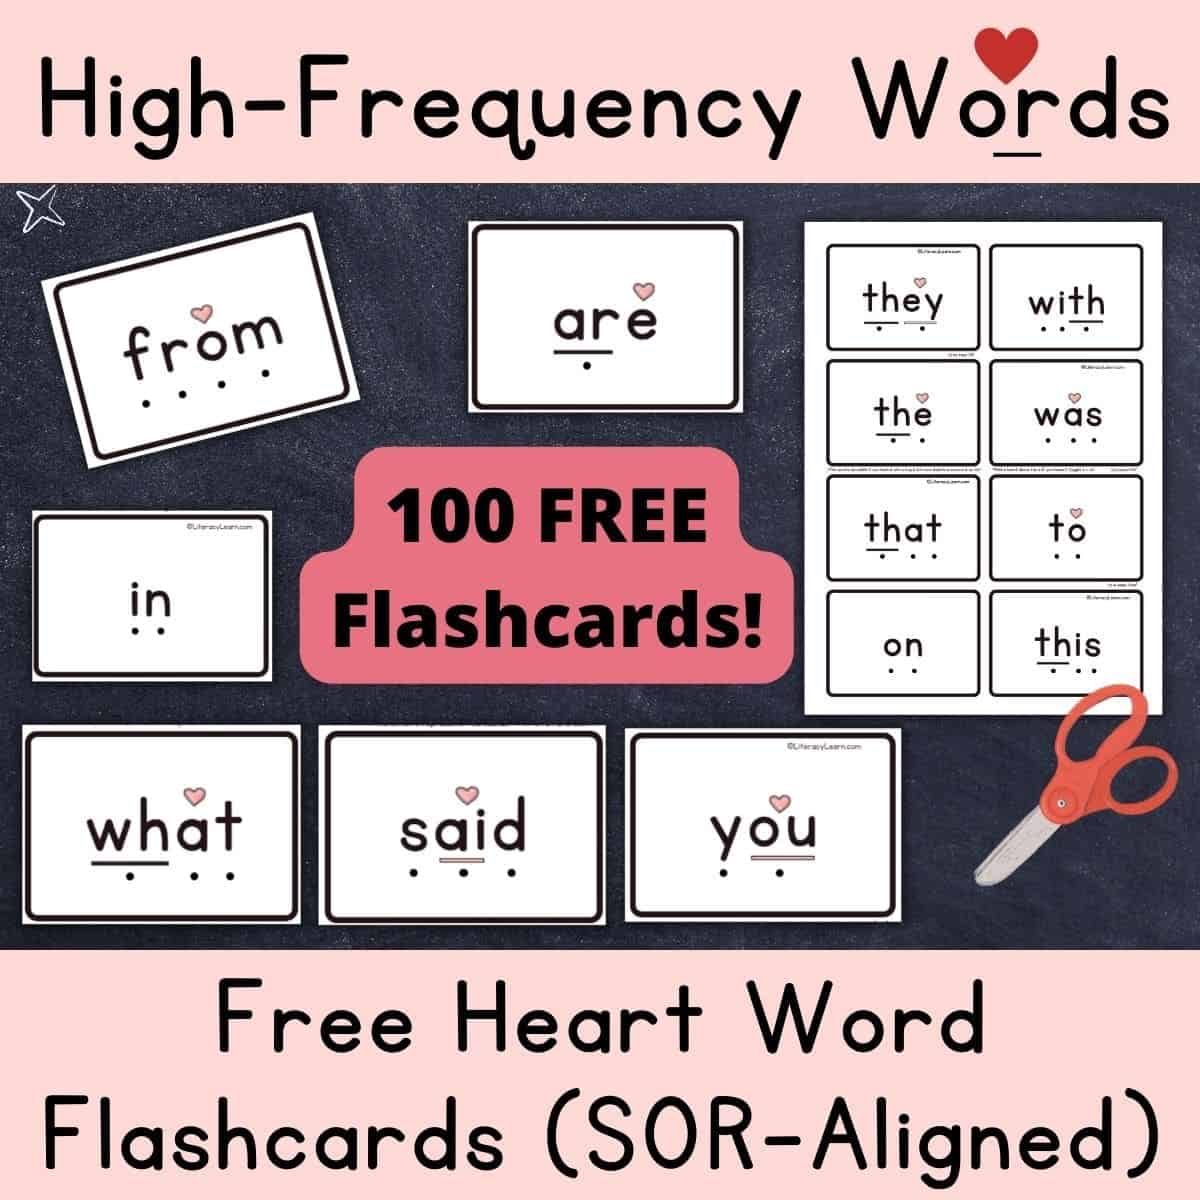 Graphic entitled "High-Frequency Words" with pictures of free SOR-aligned flashcards with heart words.